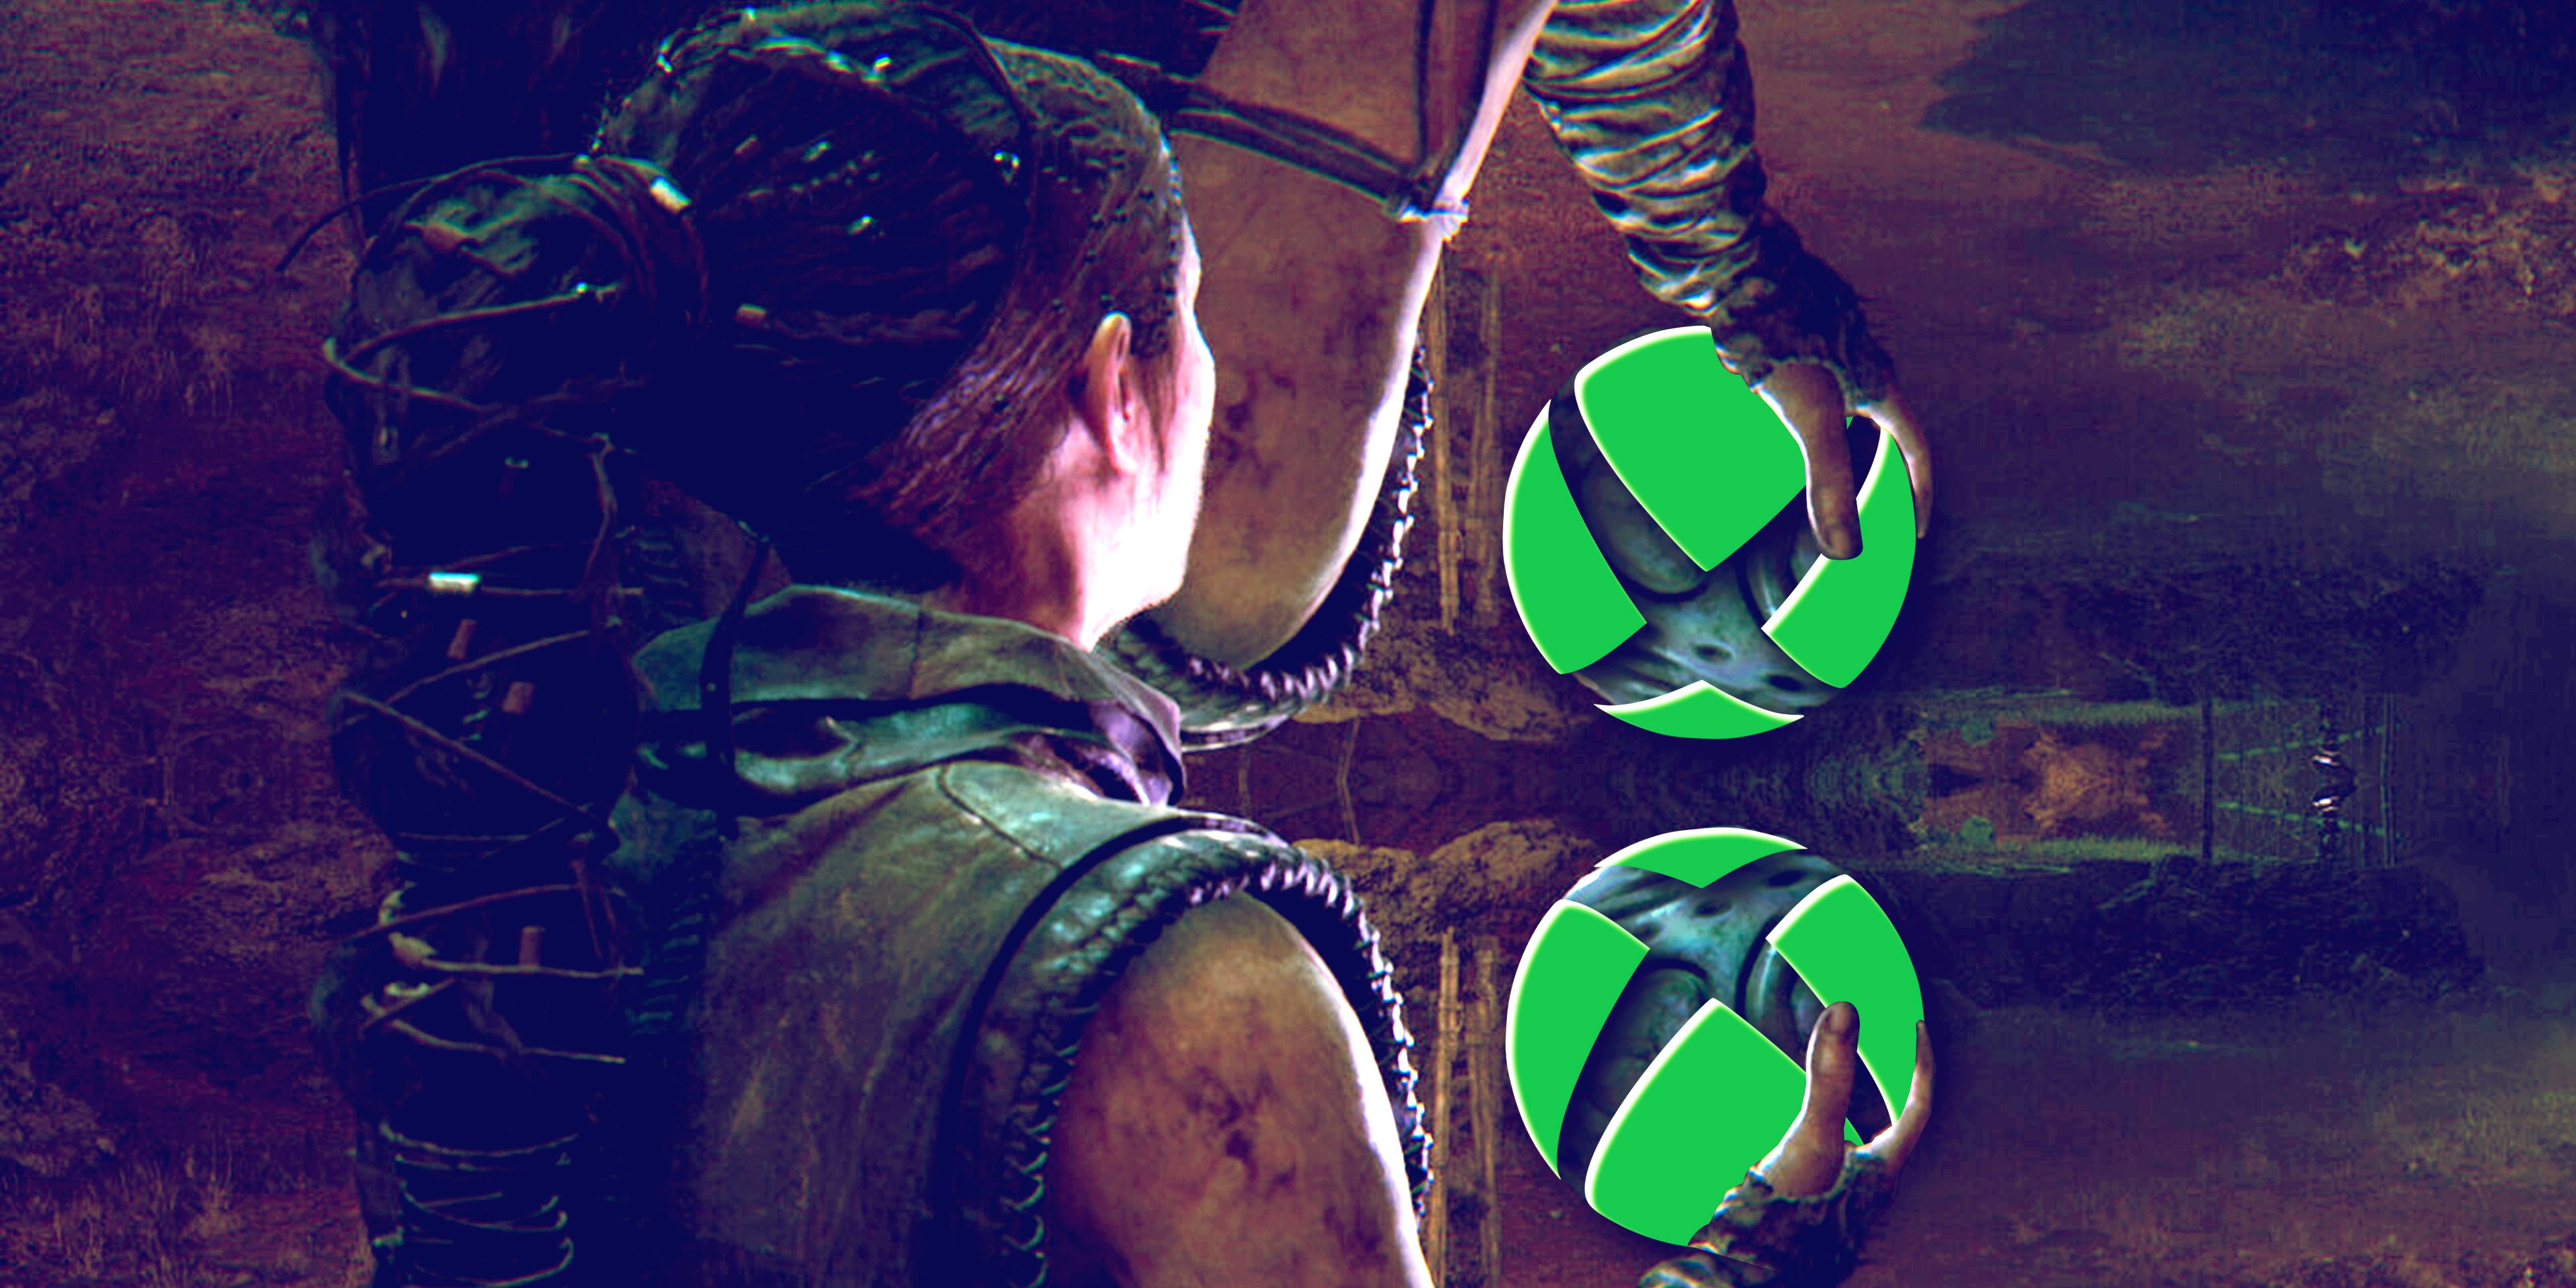 Senua from Senua's Saga: Hellblade 2 holding a green Xbox logo, which is reflected above